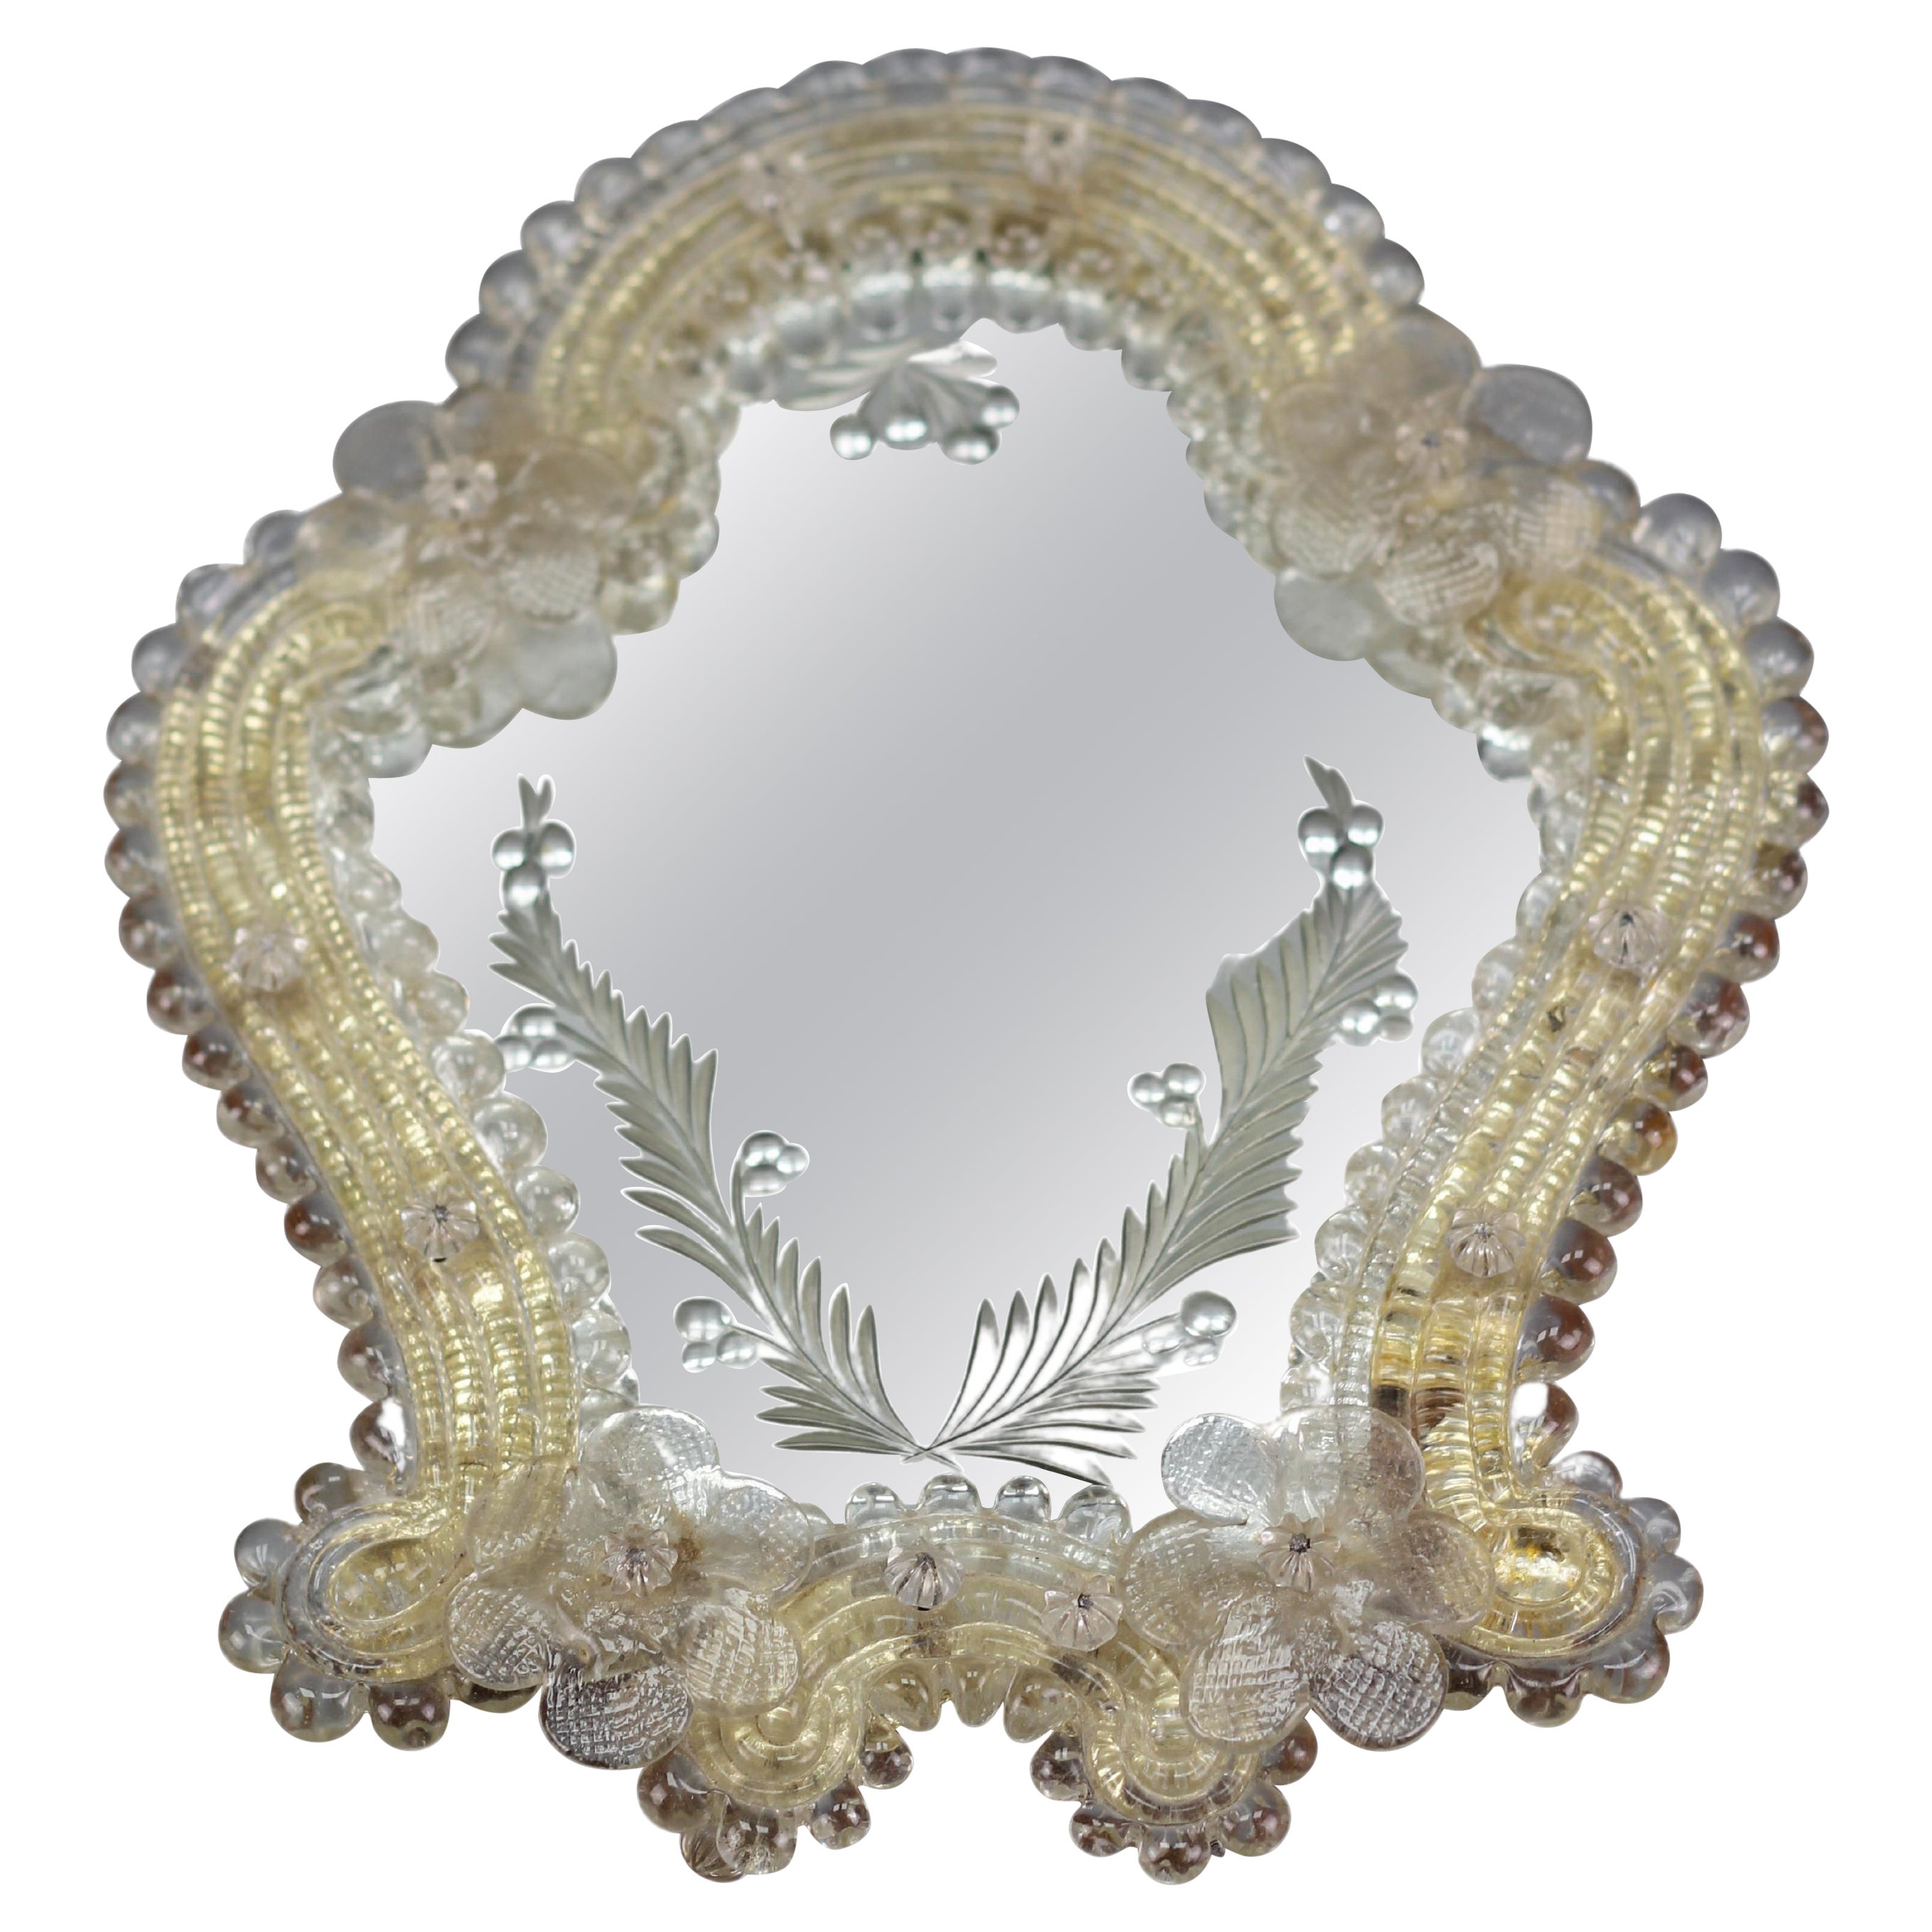 Italian Murano Clear and Light Golden Glass Etched Wall Mirror, circa 1950s